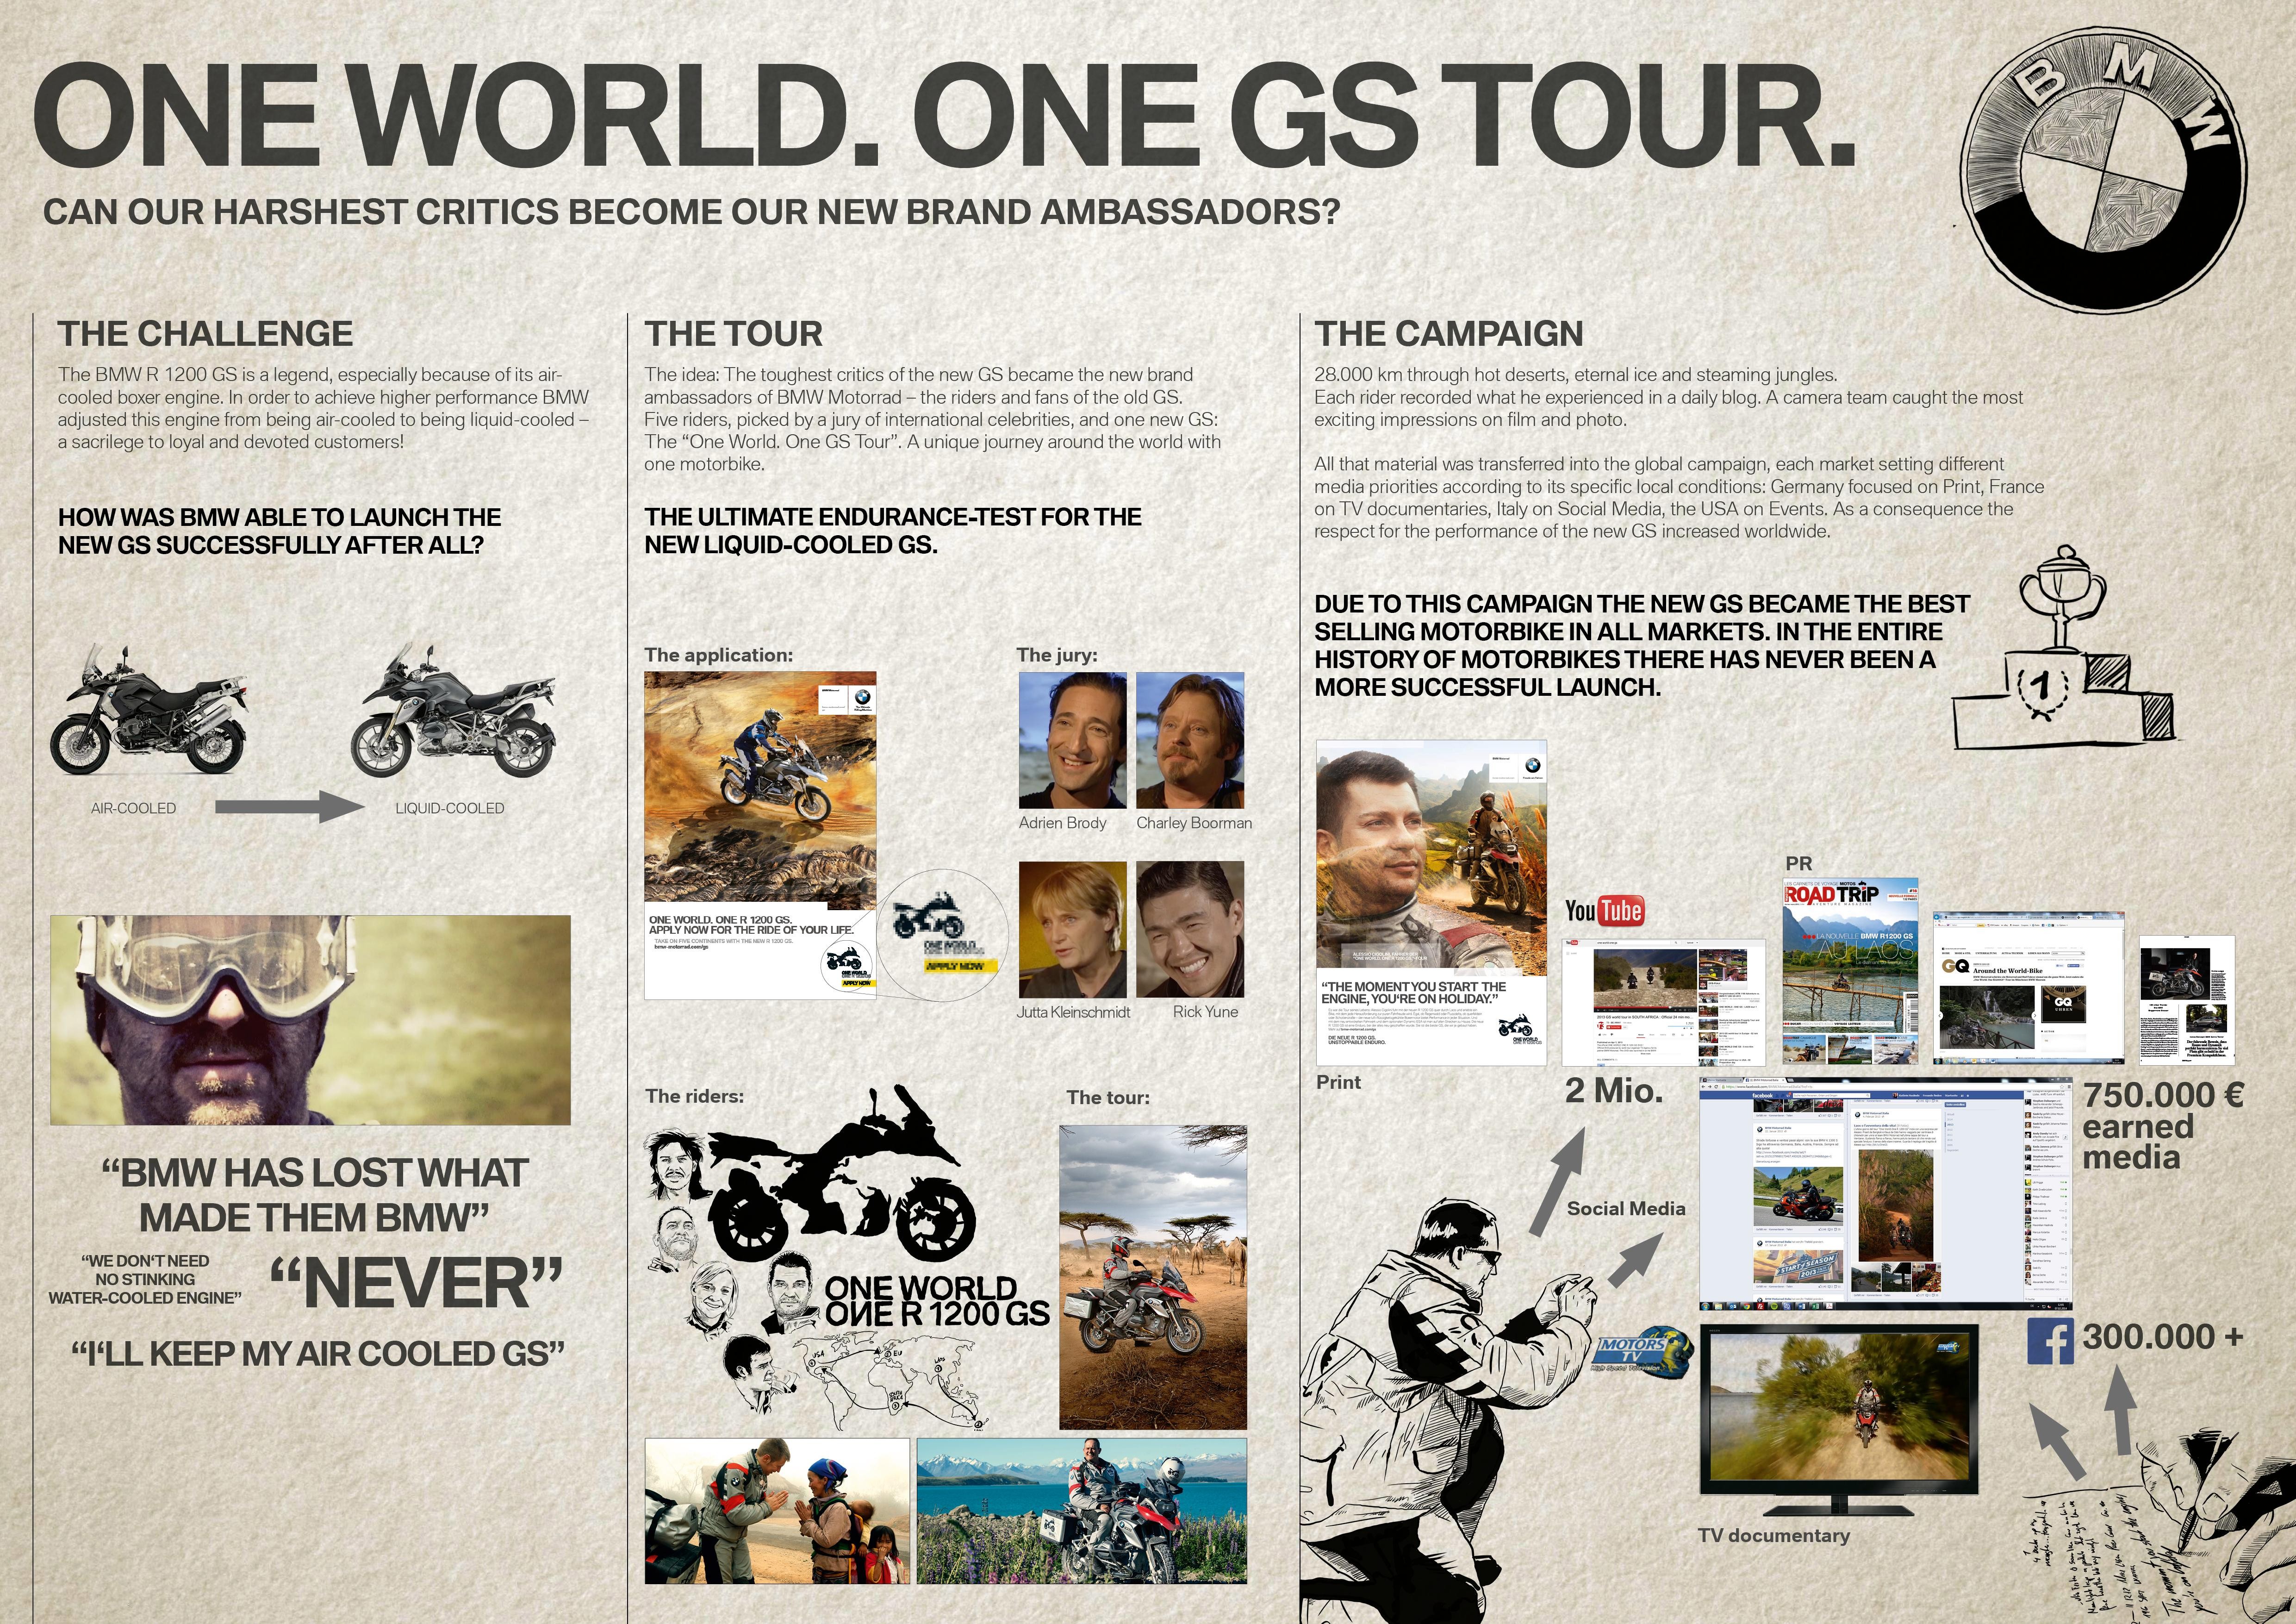 ONE WORLD. ONE R 1200 GS.